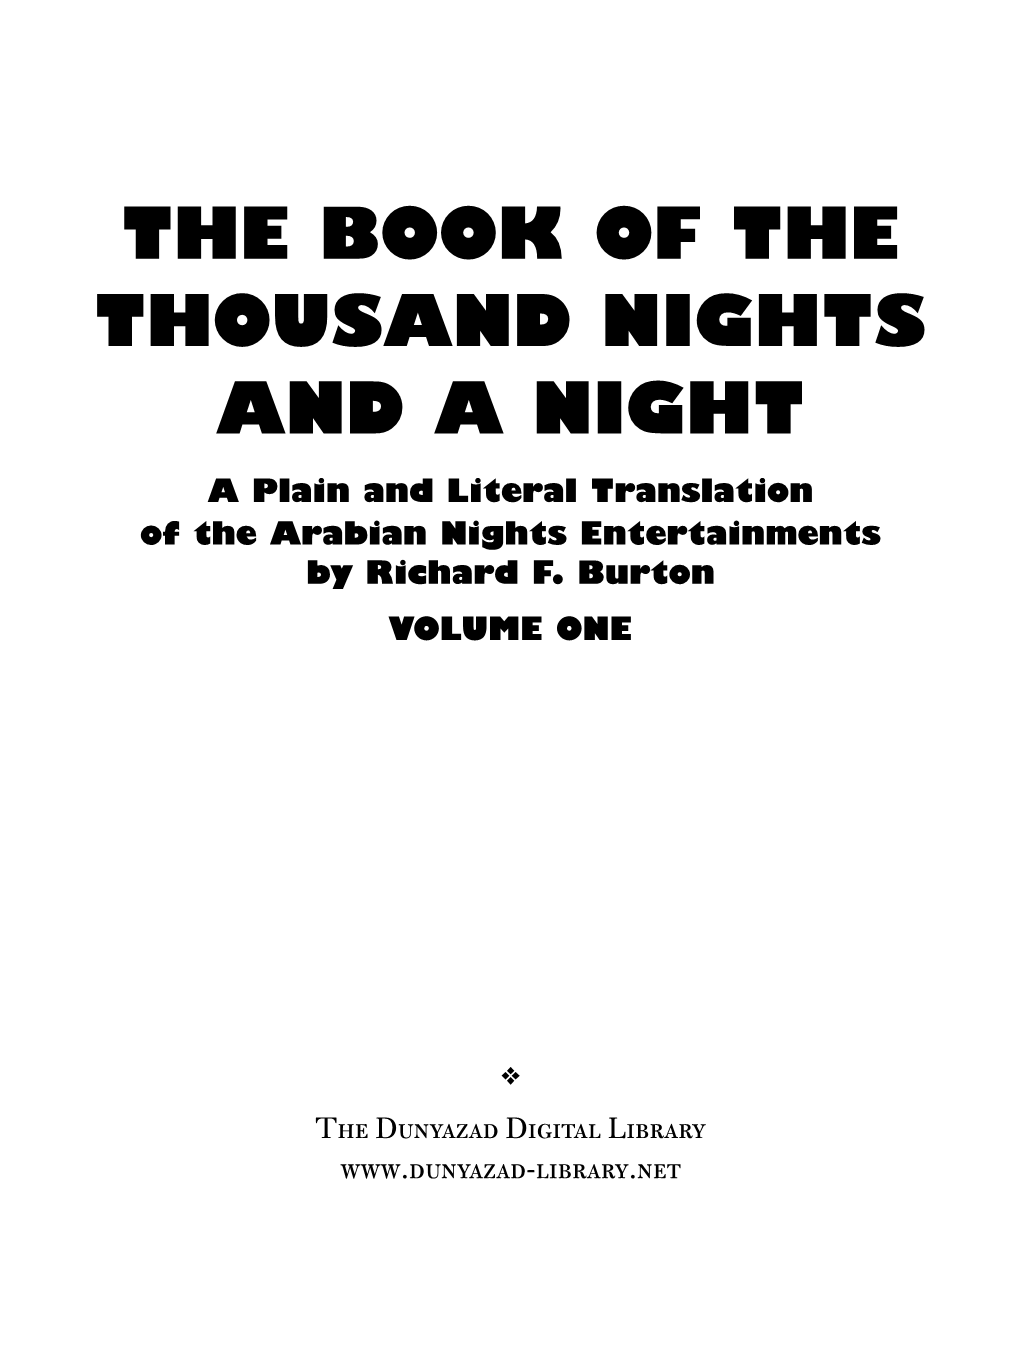 THE BOOK of the THOUSAND NIGHTS and a NIGHT a Plain and Literal Translation of the Arabian Nights Entertainments by Richard F